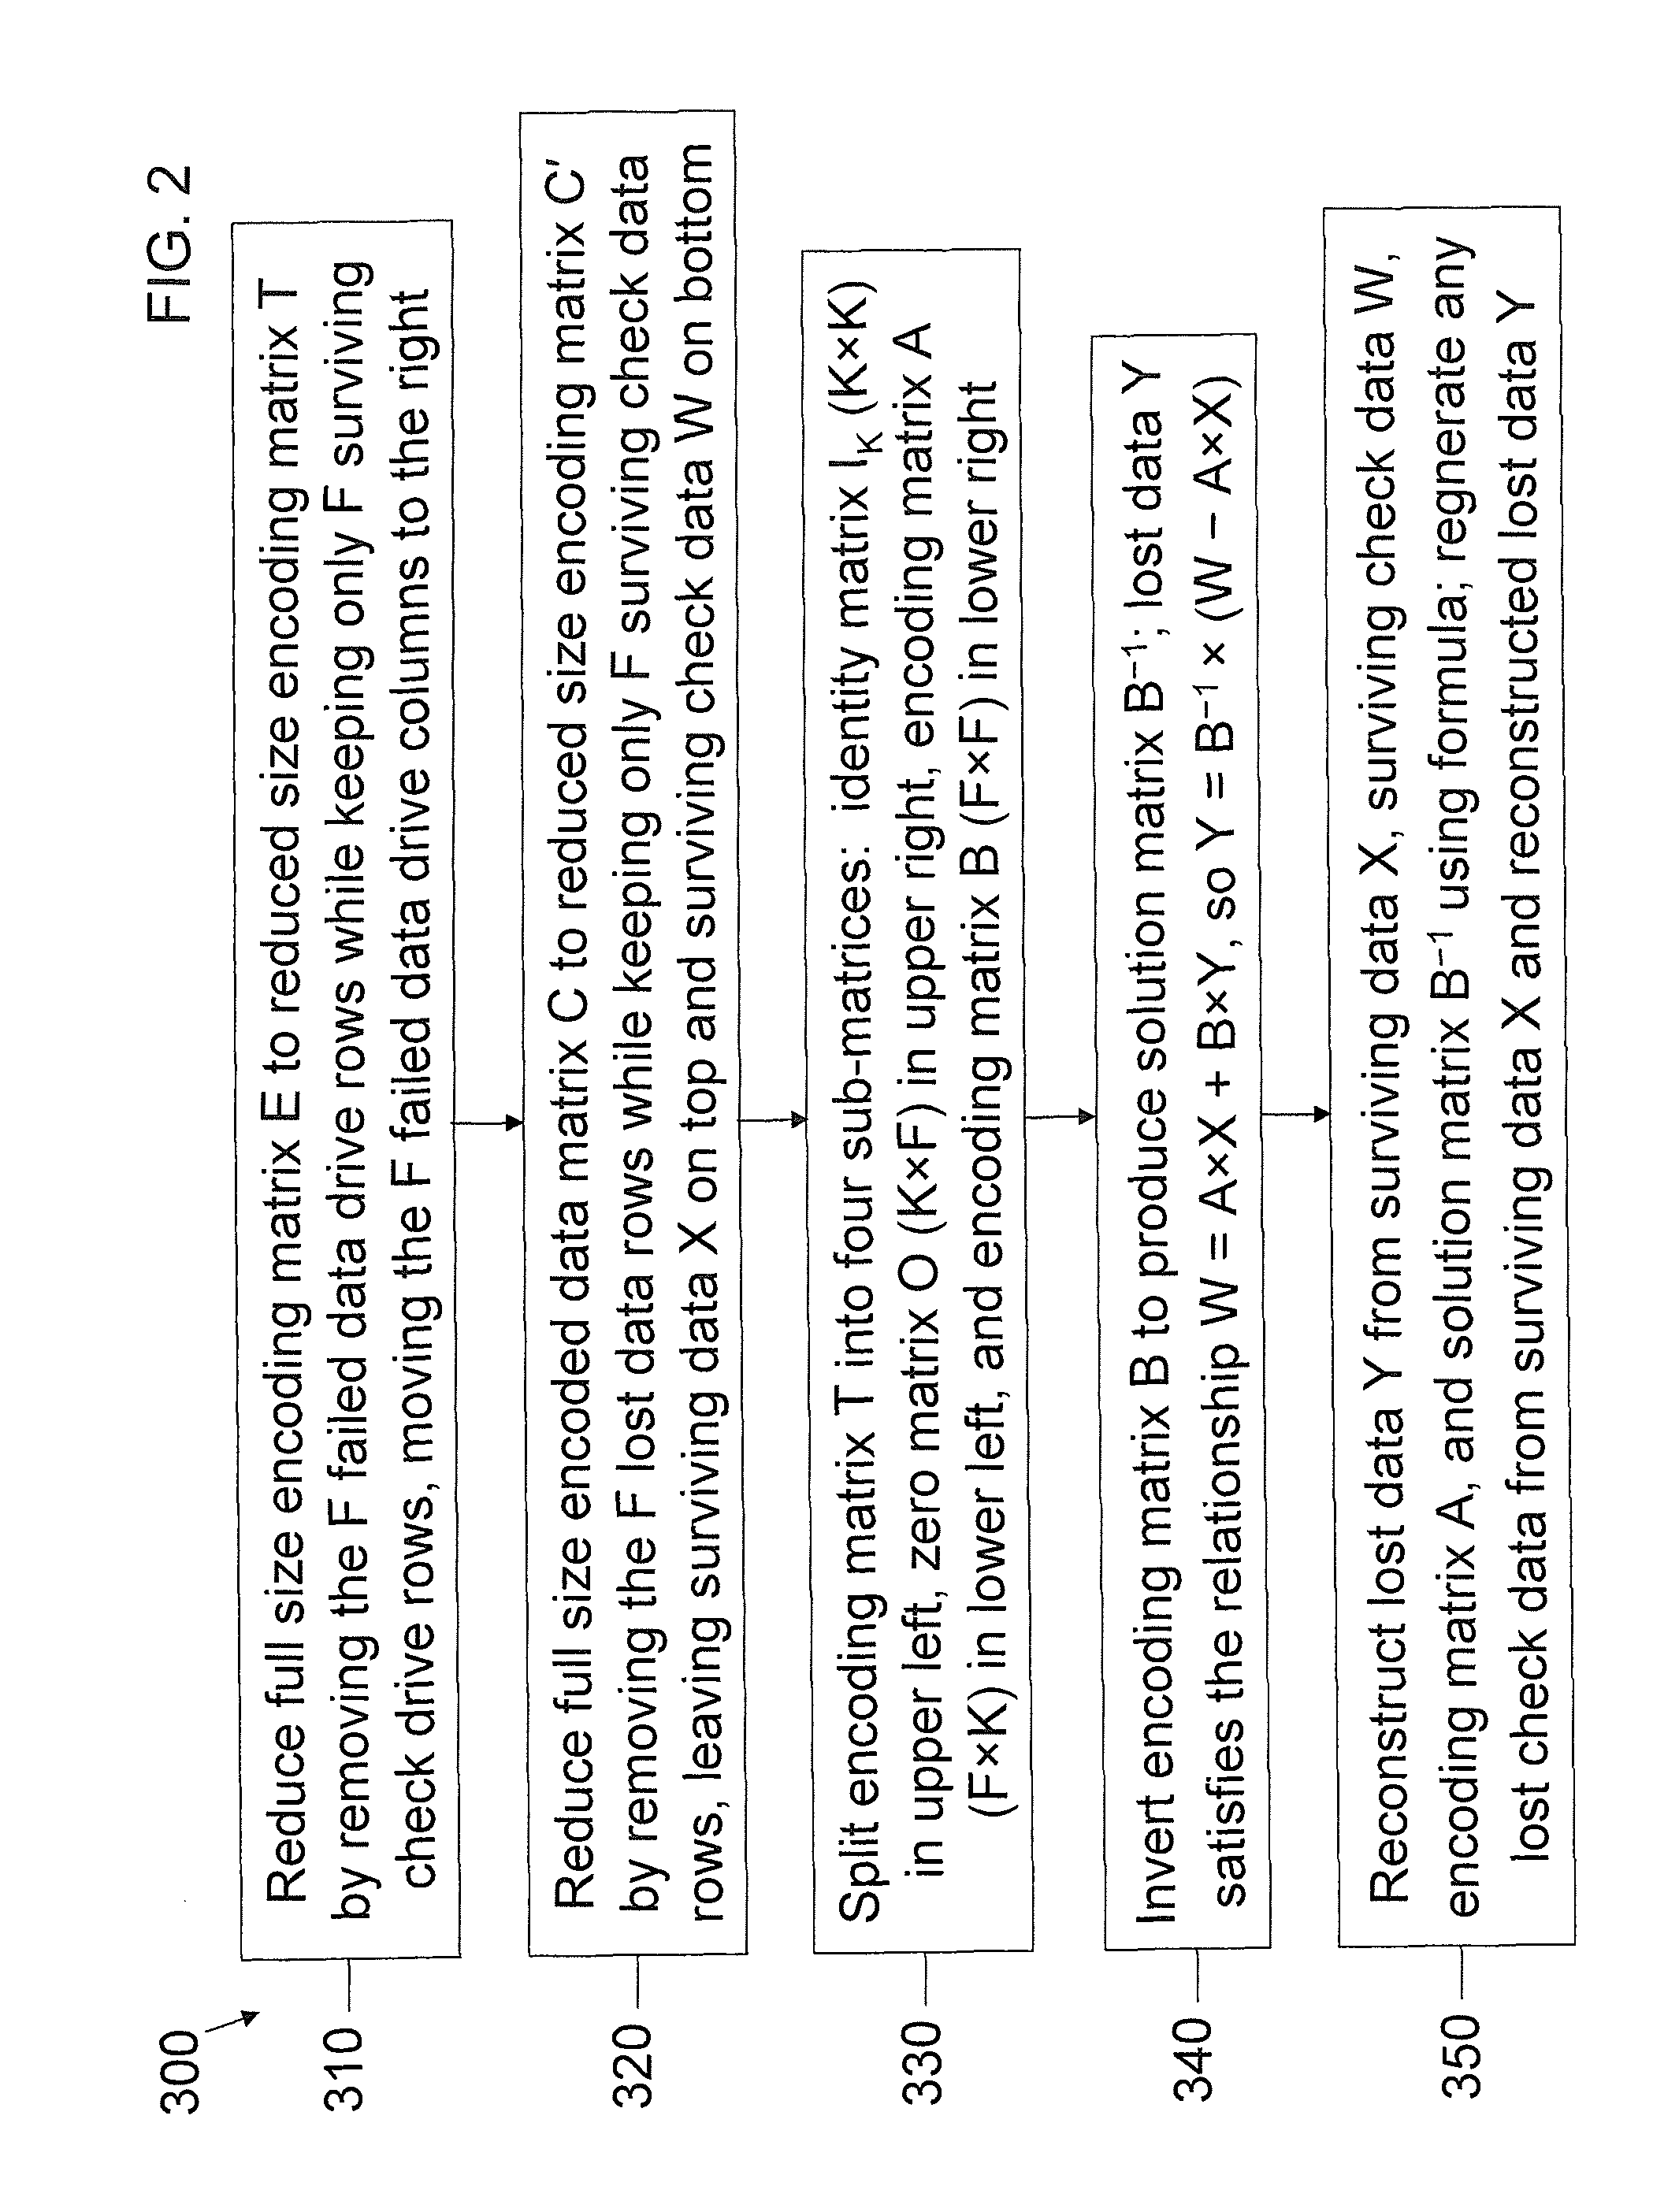 Accelerated erasure coding system and method